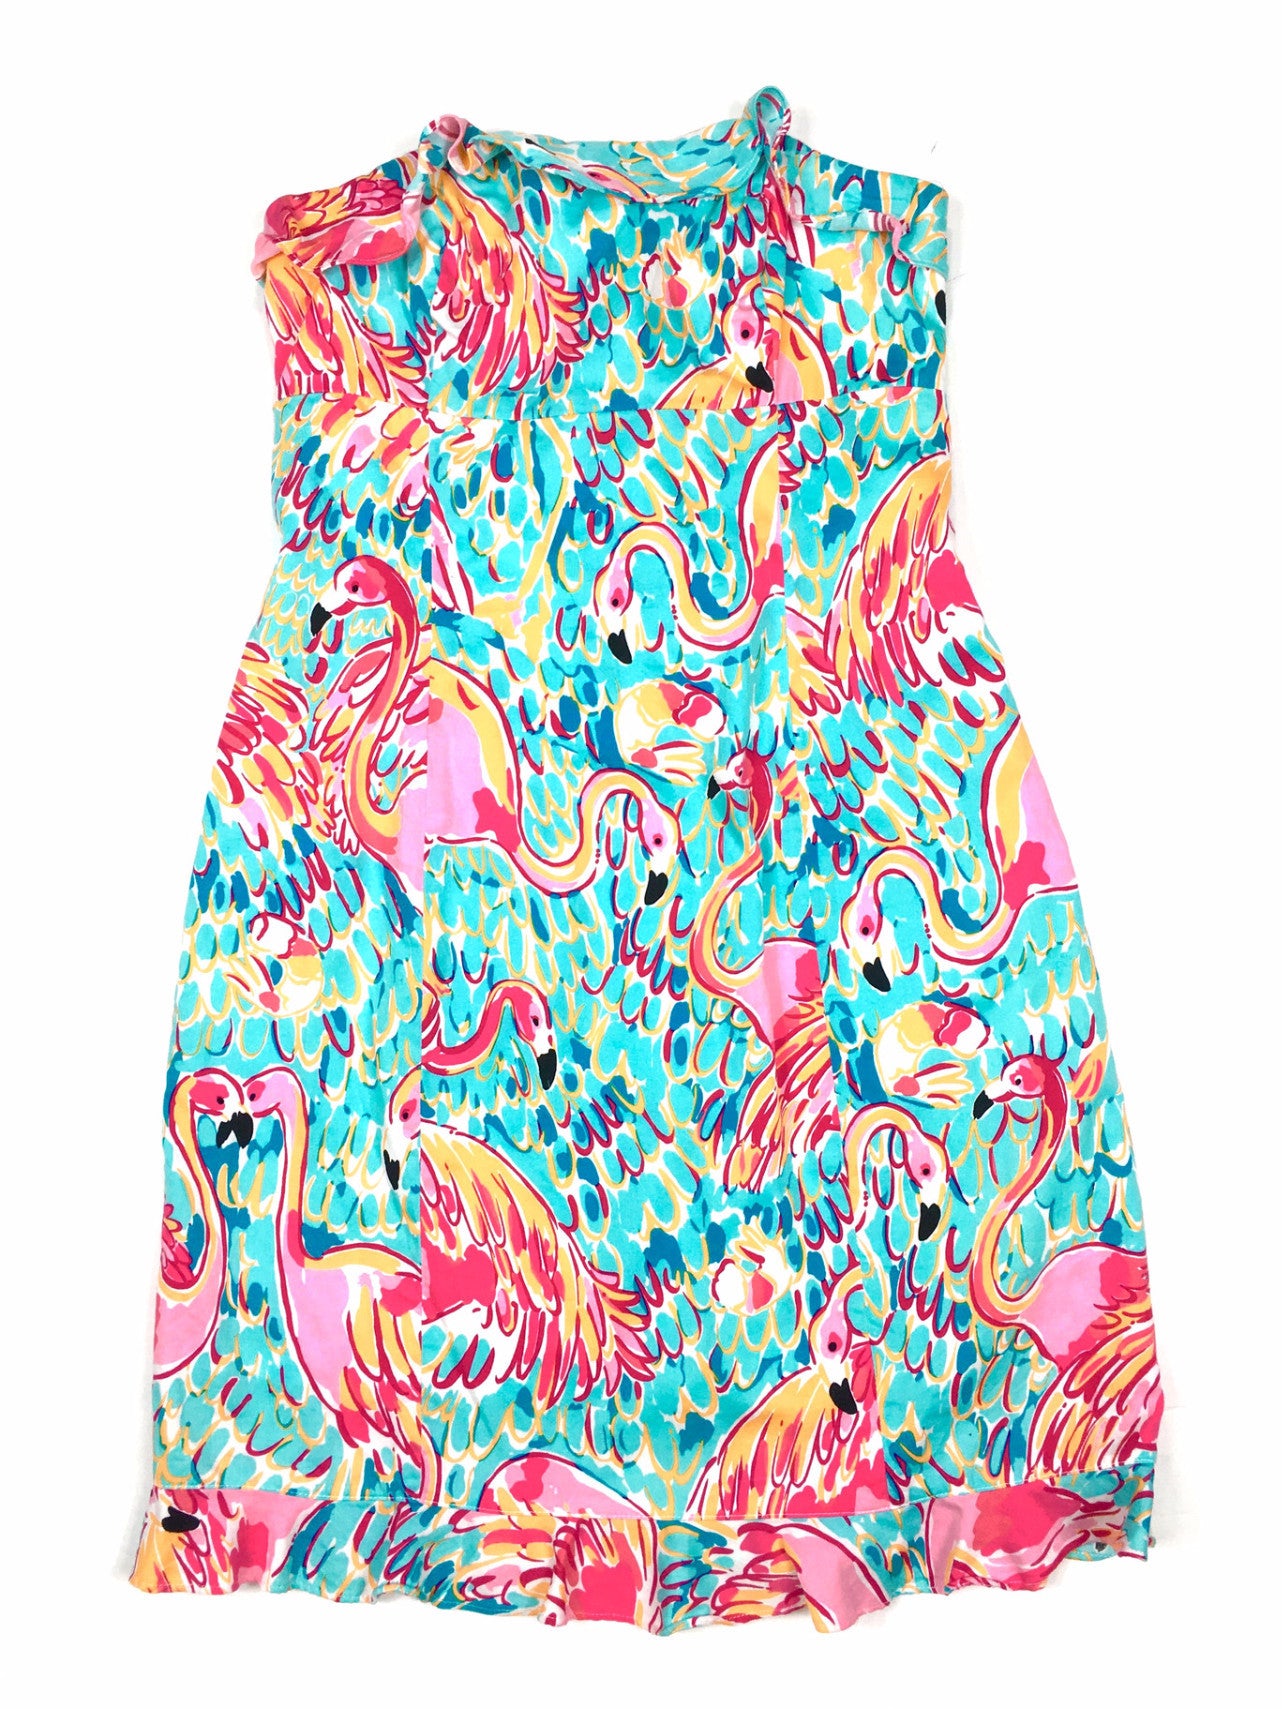 LILLY PULITZER Dress (SMALL)